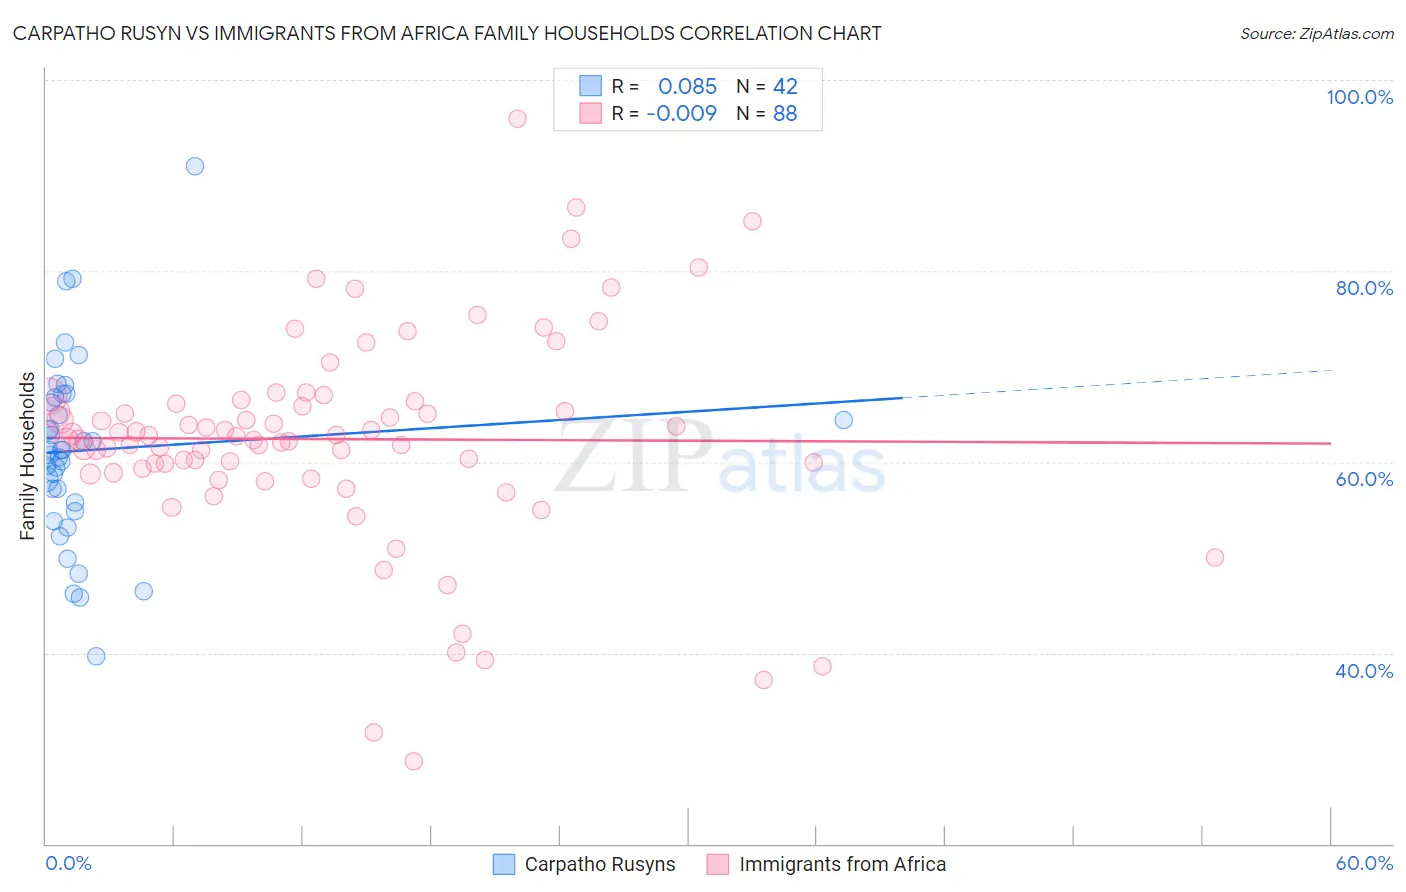 Carpatho Rusyn vs Immigrants from Africa Family Households